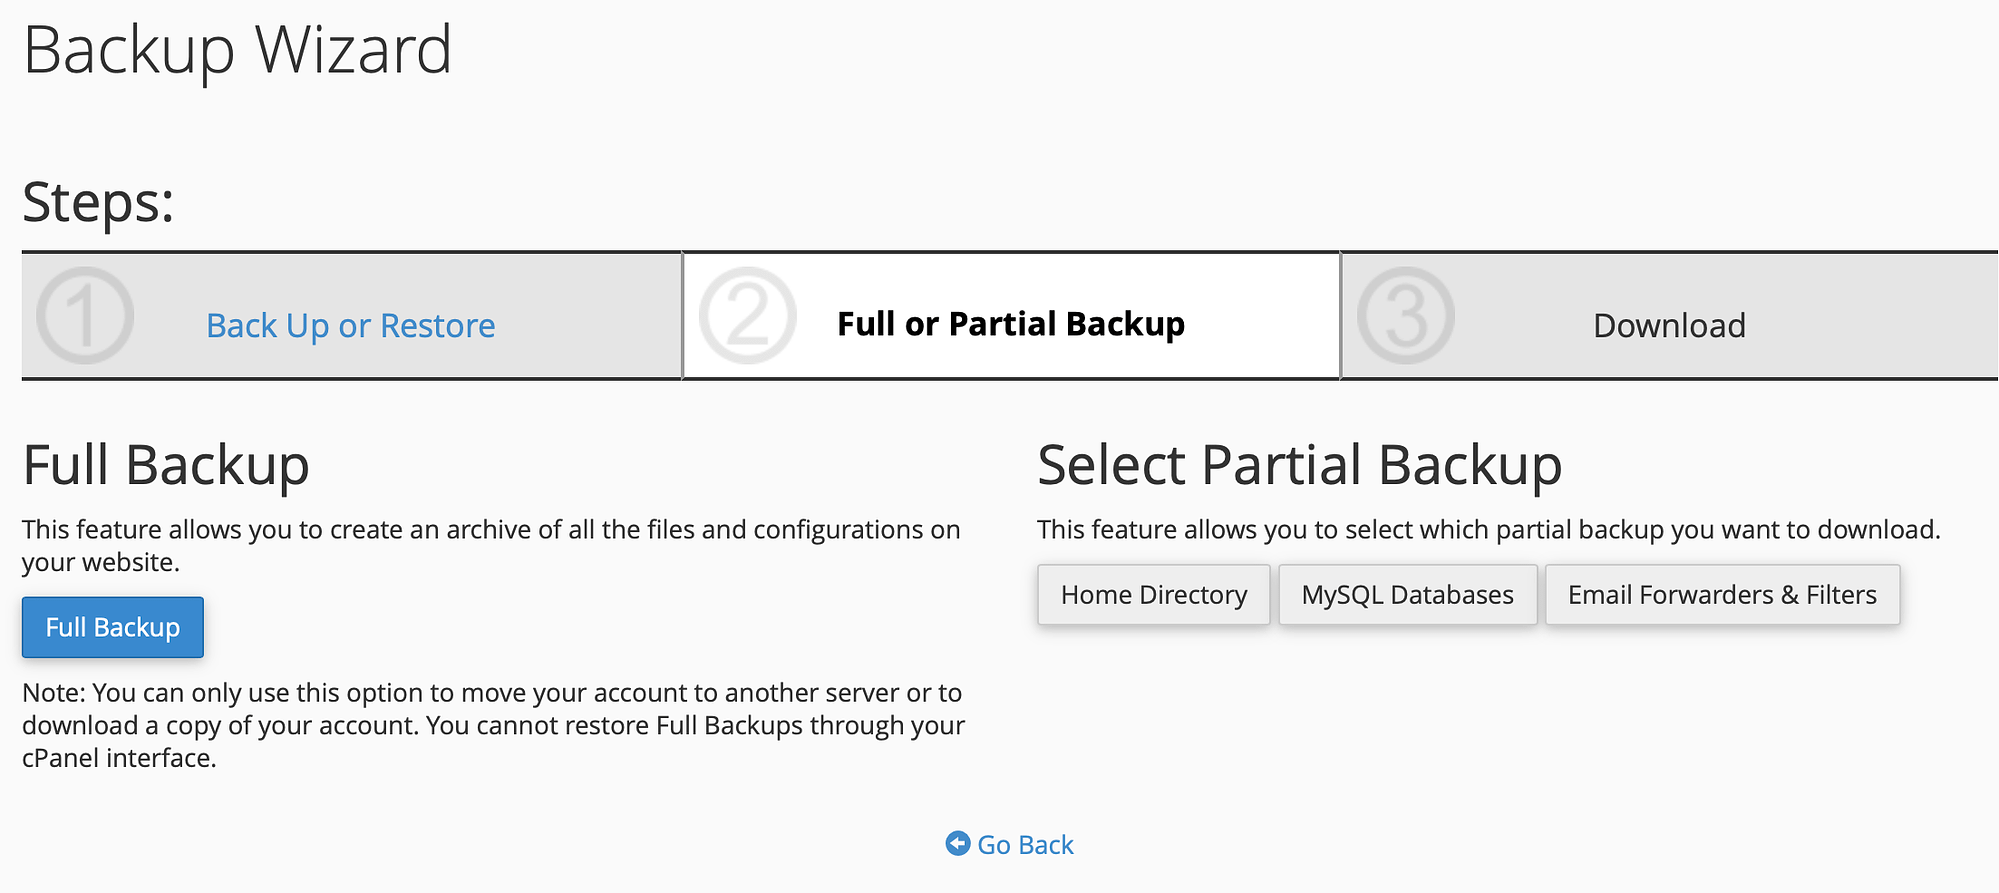 Make a full backup with the Backup Wizard.